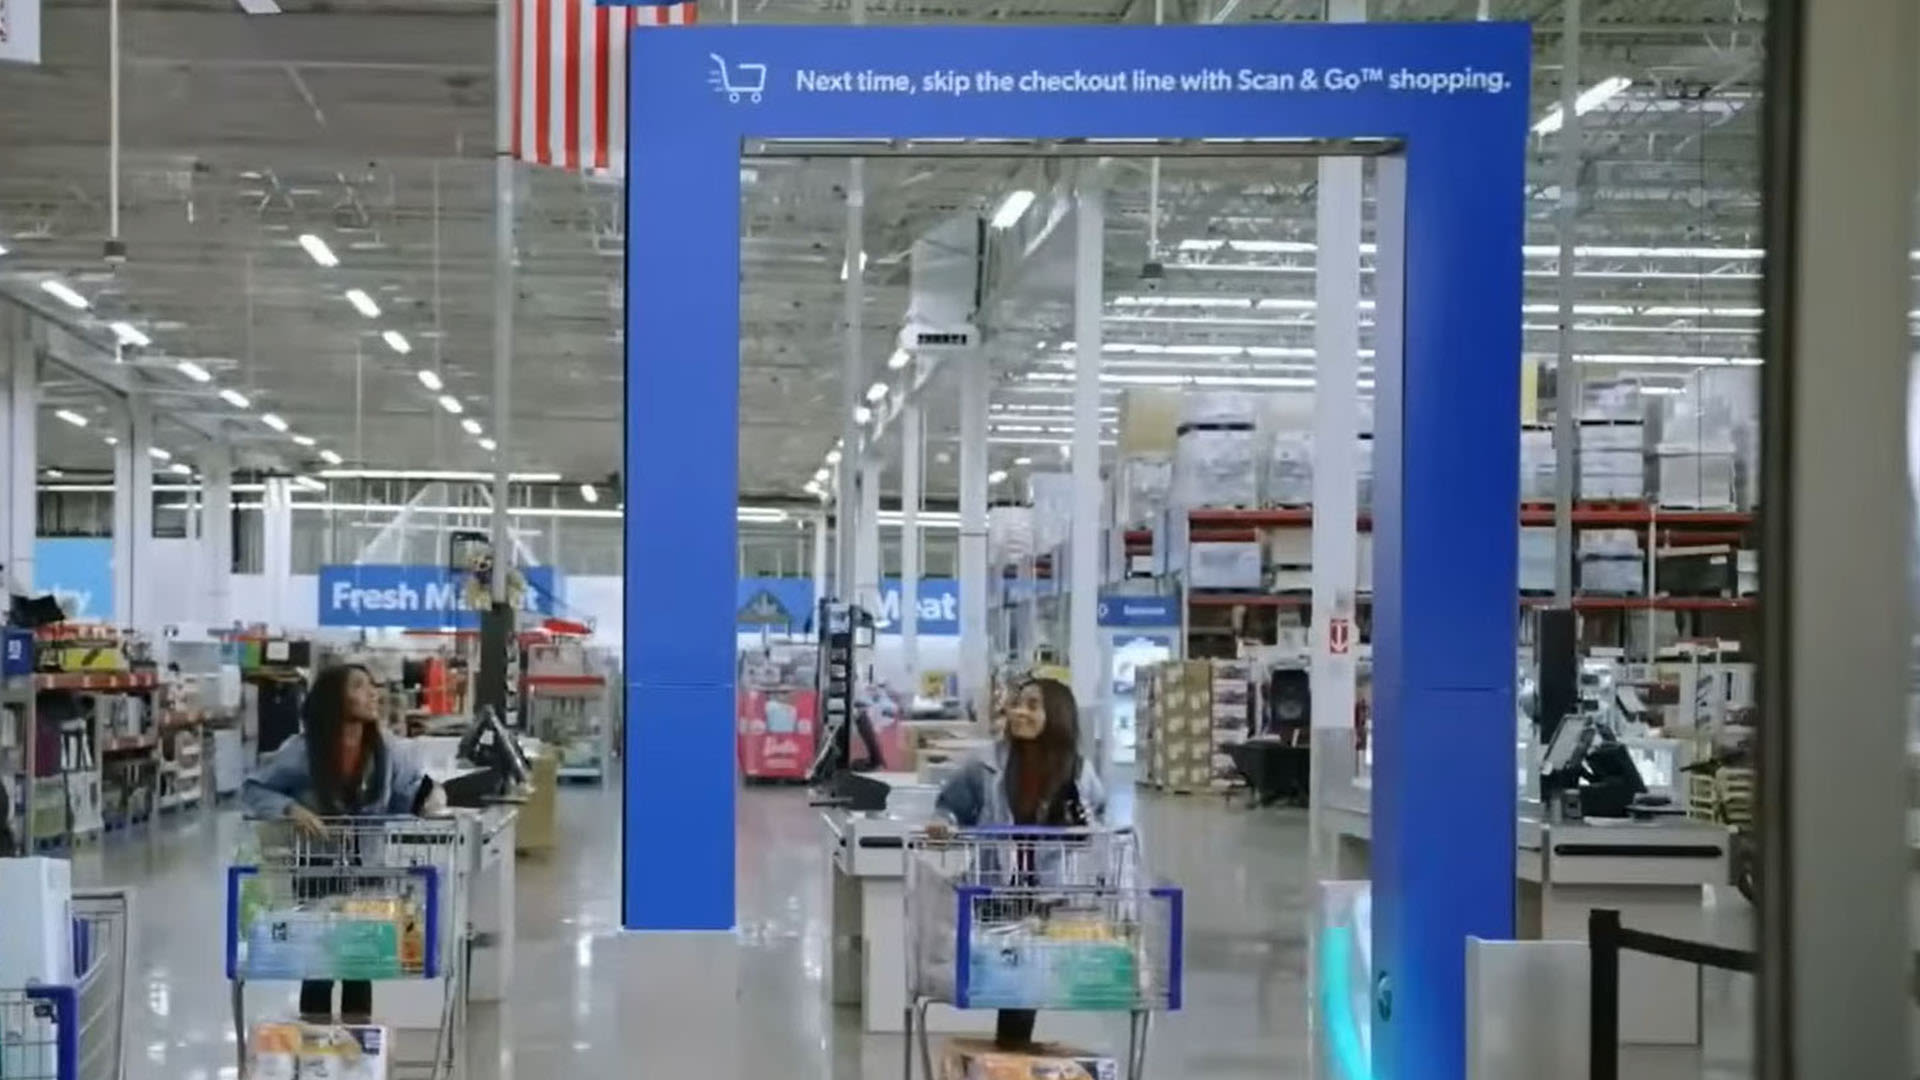 Sam's Club chief shows off how AI for new 'exit archway' receipt check works